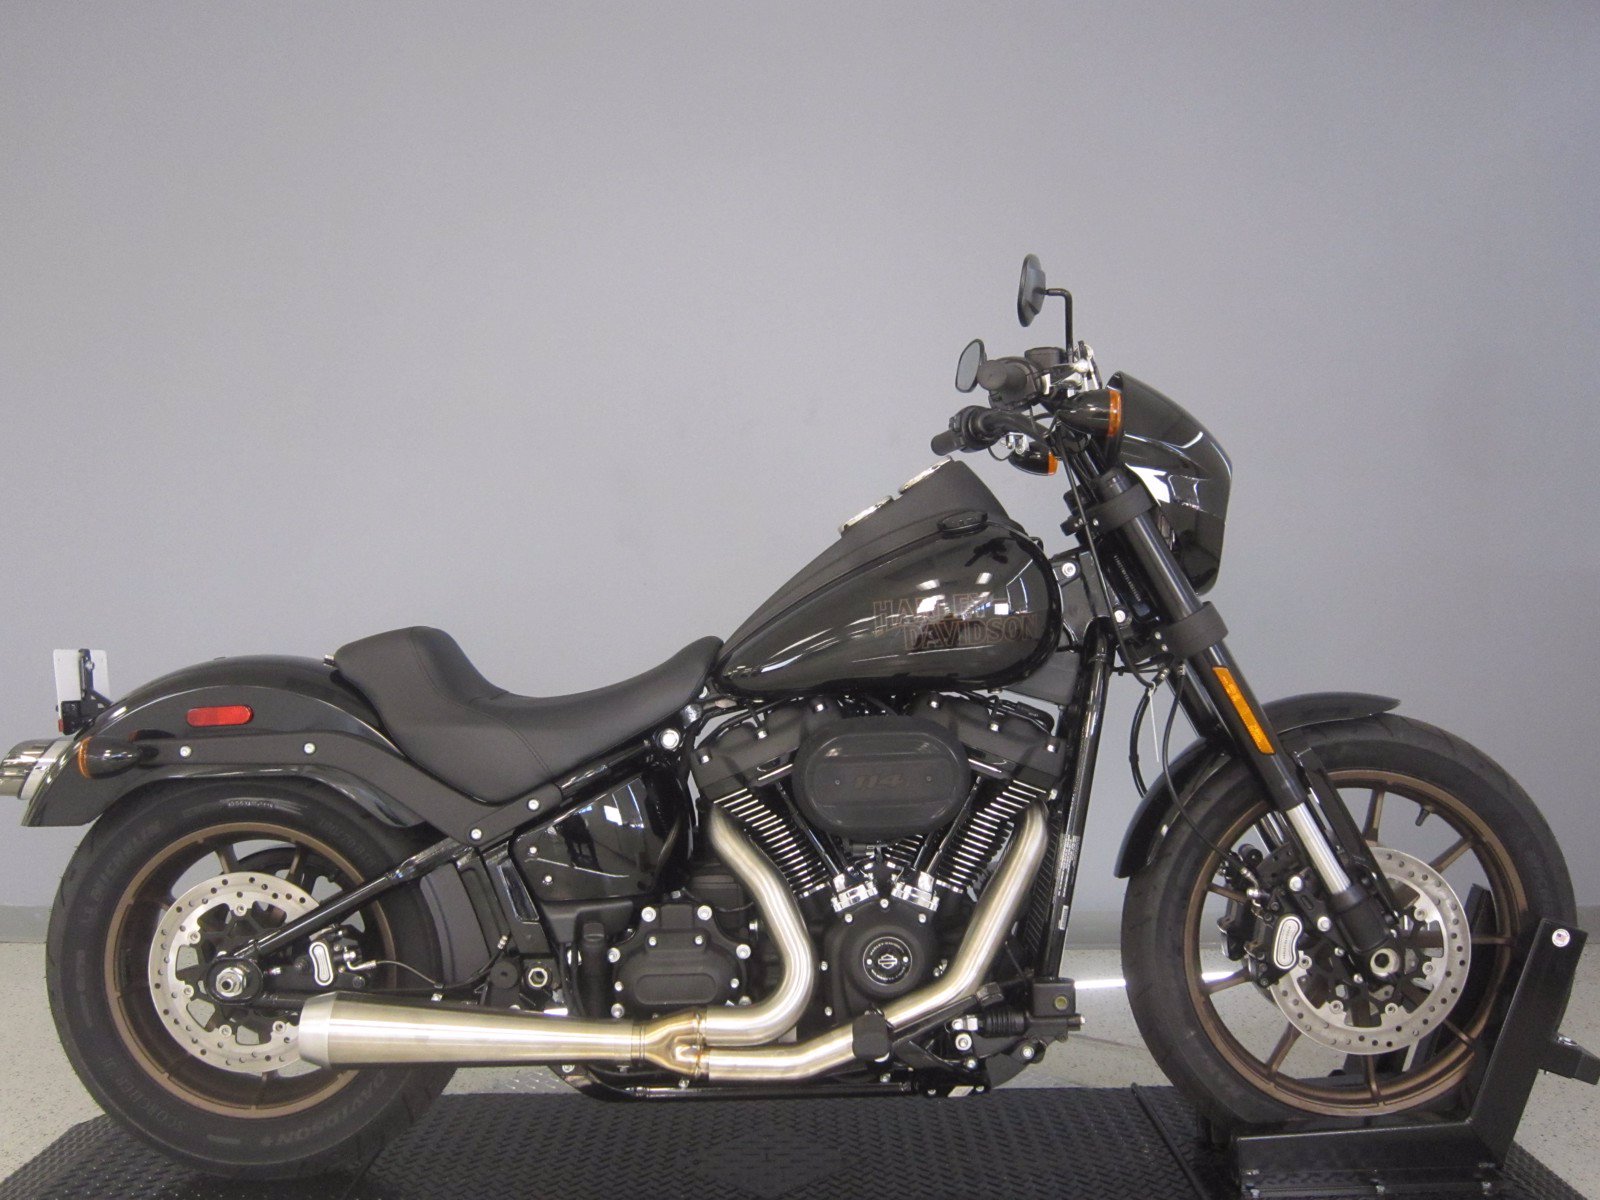 New 2020 Harley-Davidson Softail Low Rider S FXLRS Touring in N